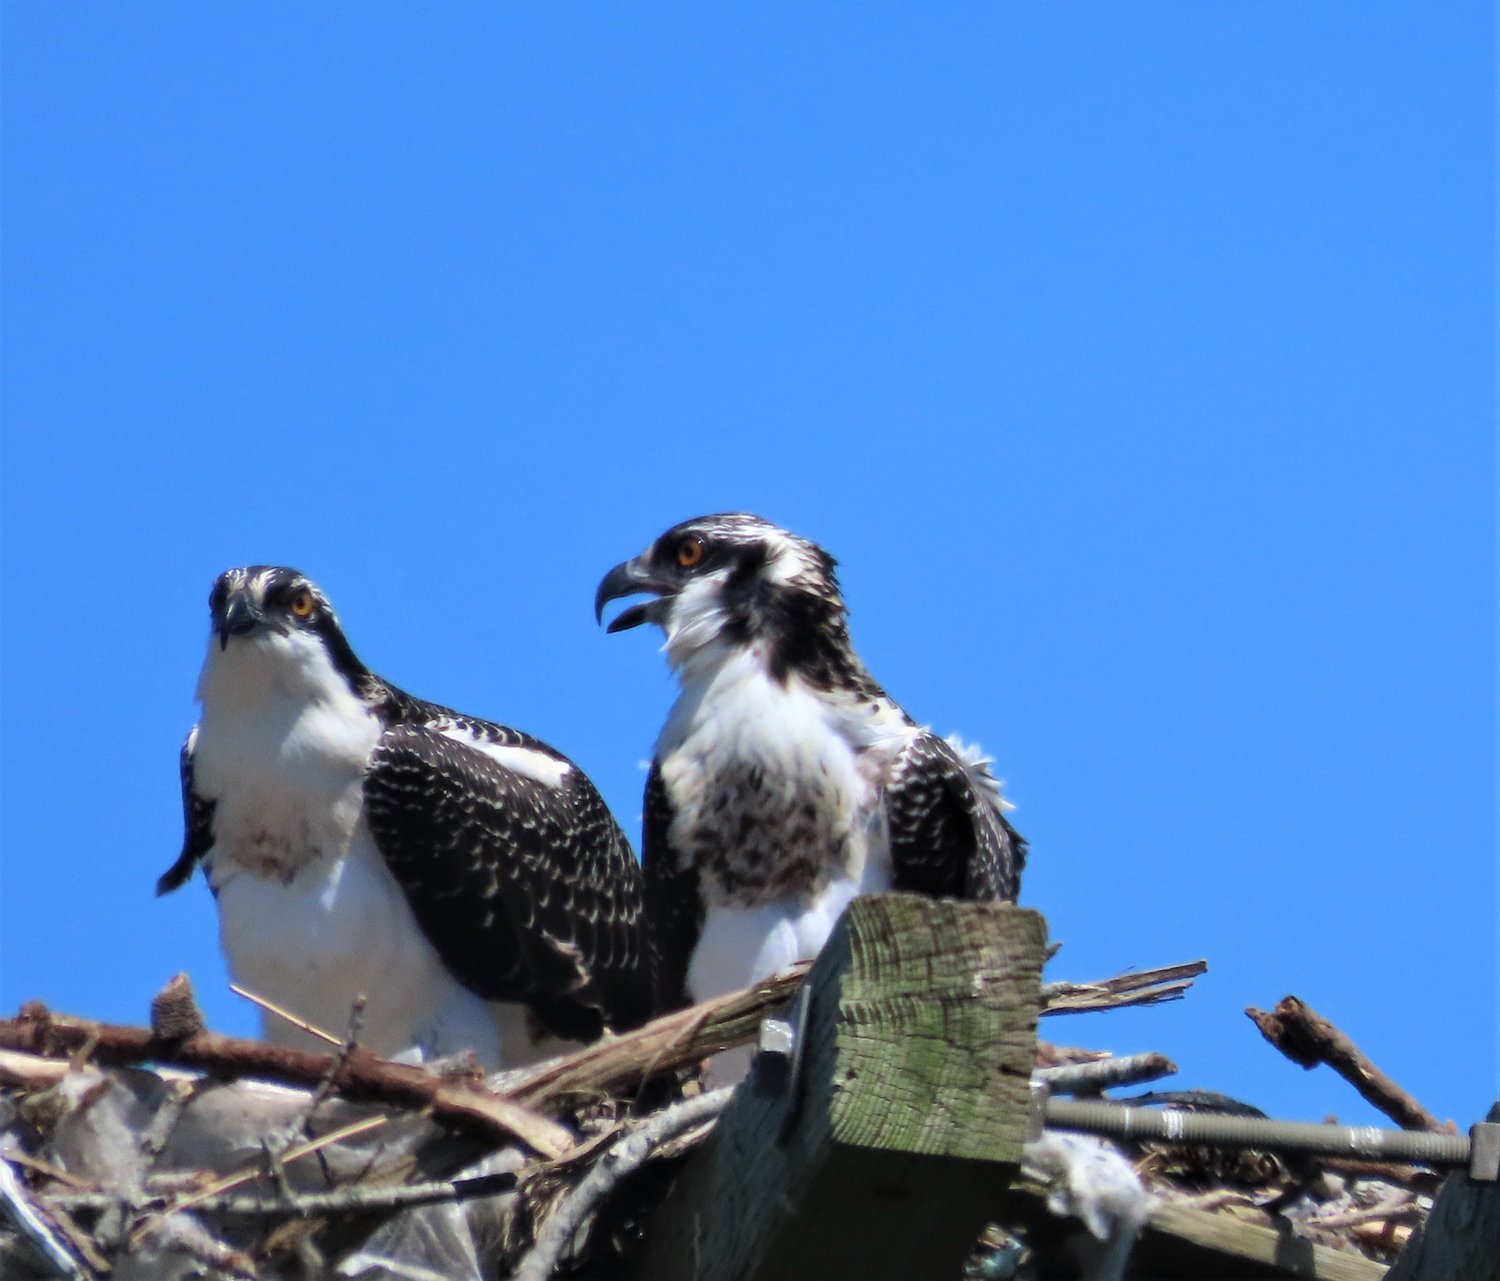 Young Ospreys have started fledging, but still wait in the nest for dinner; parental handouts are still arriving.